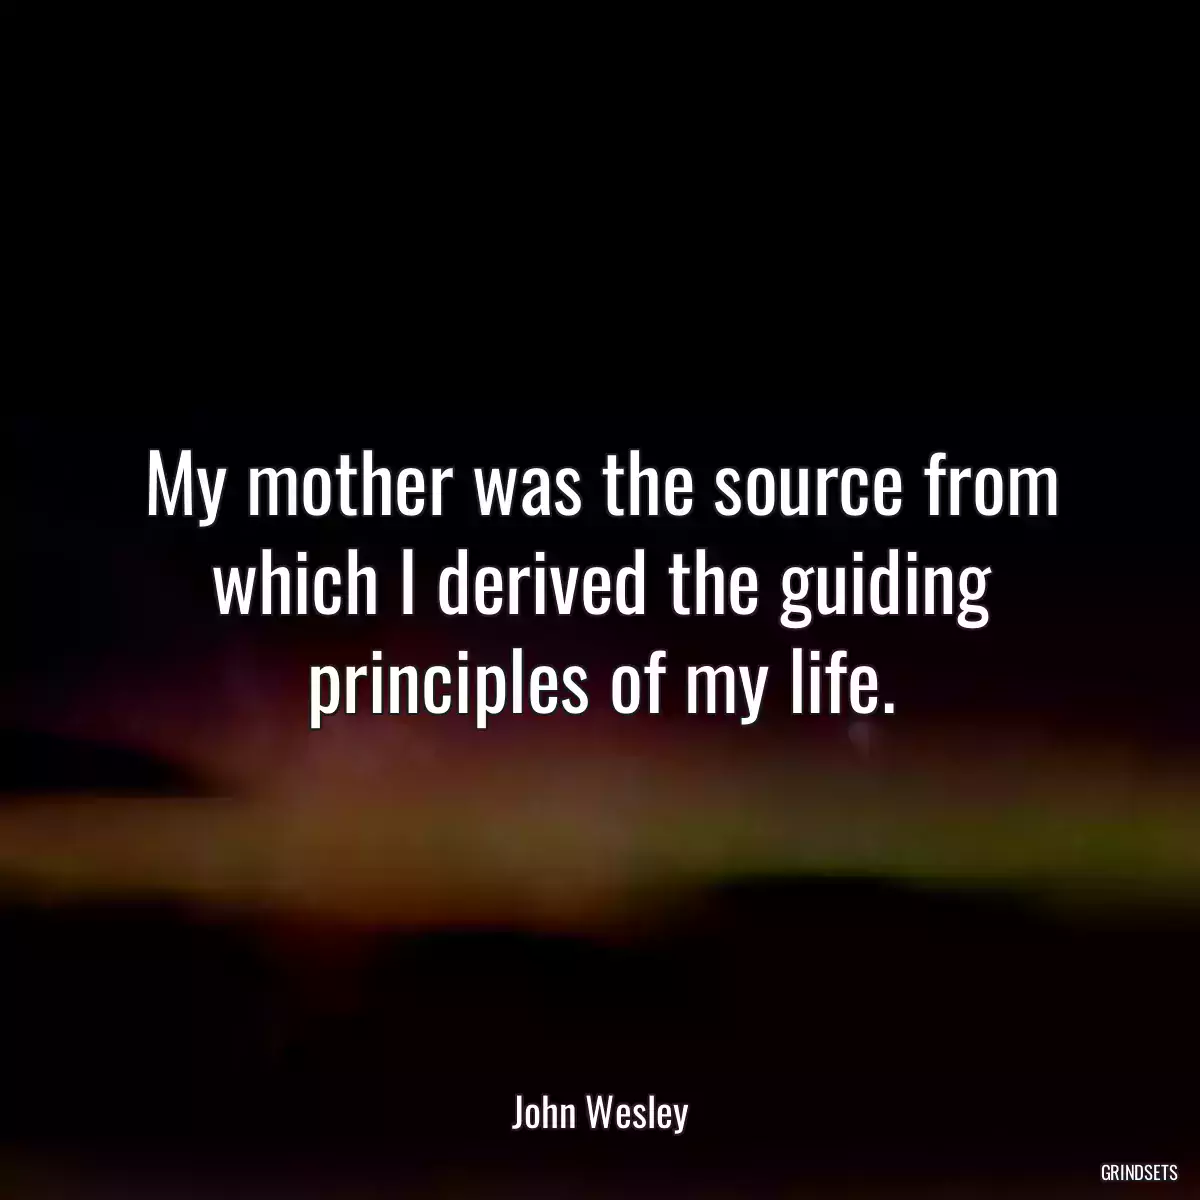 My mother was the source from which I derived the guiding principles of my life.